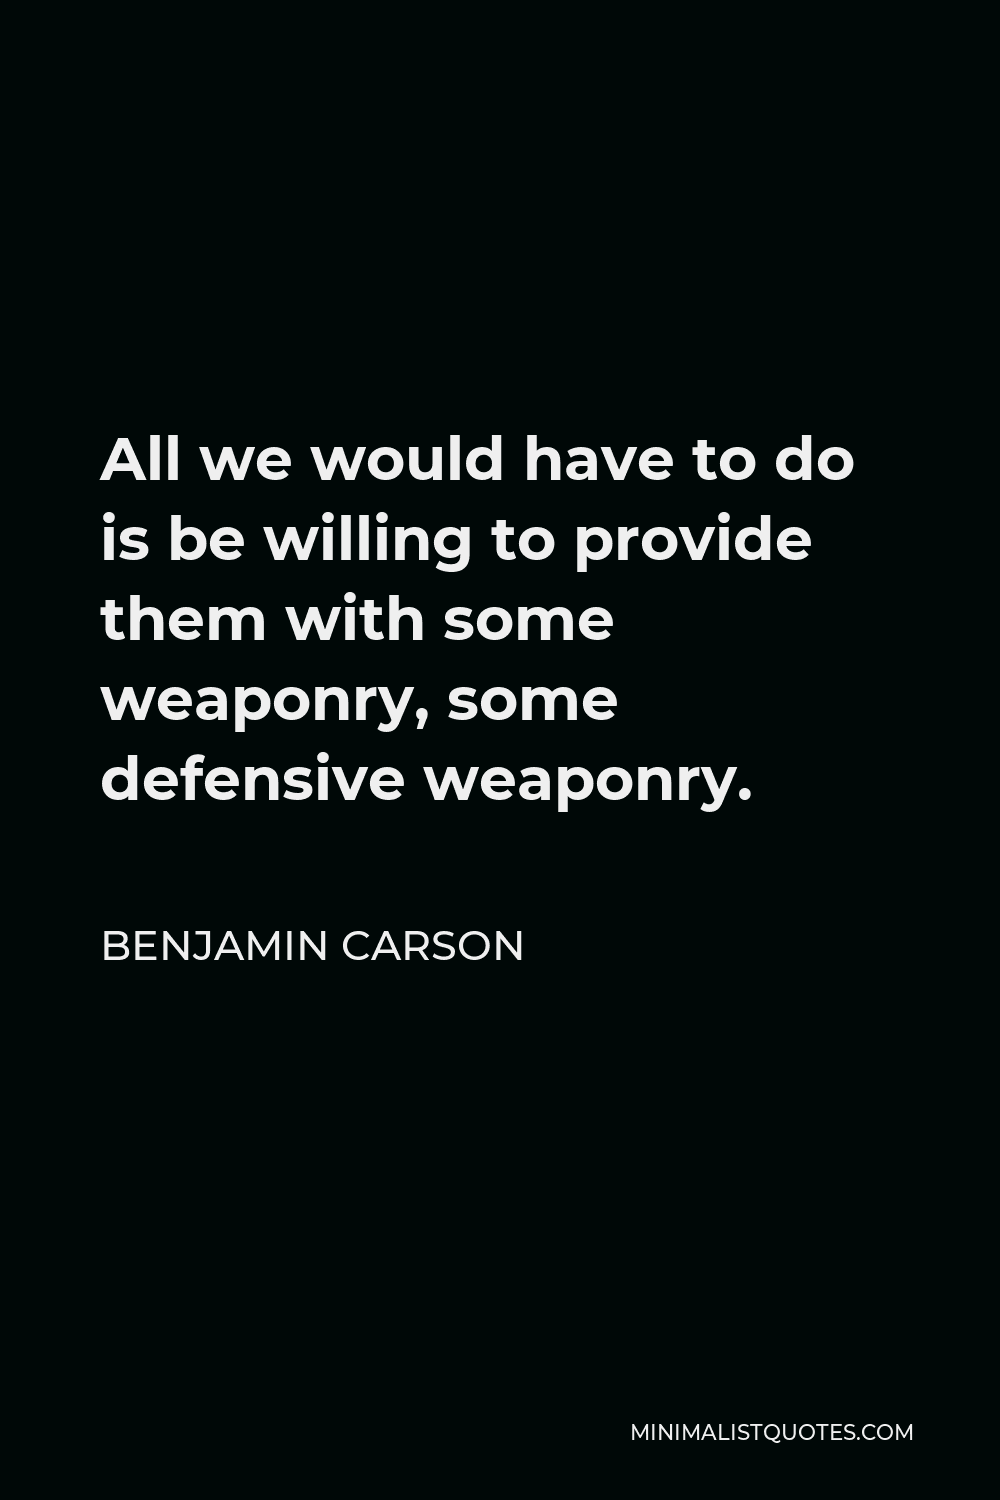 Benjamin Carson Quote - All we would have to do is be willing to provide them with some weaponry, some defensive weaponry.